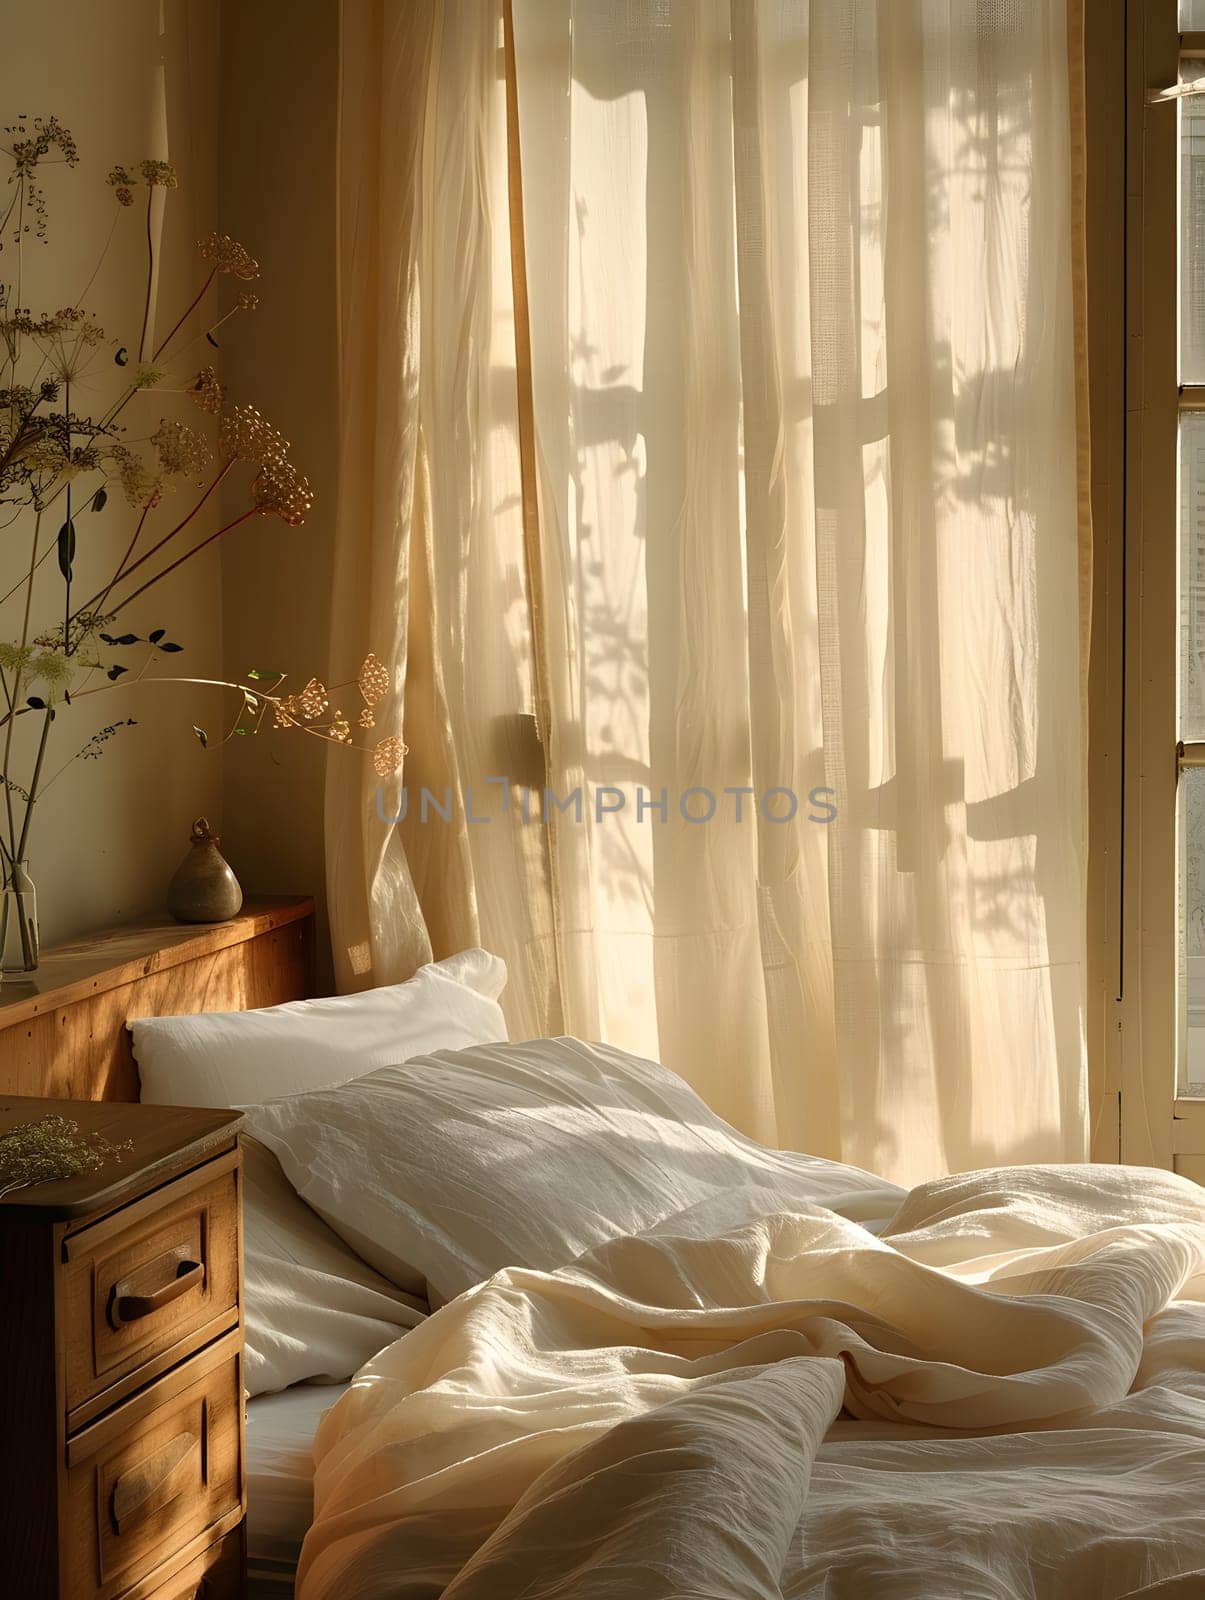 A bedroom with a hardwood floor, a cozy bed frame, and a window covered with curtains. The furniture adds comfort and the building has tints and shades